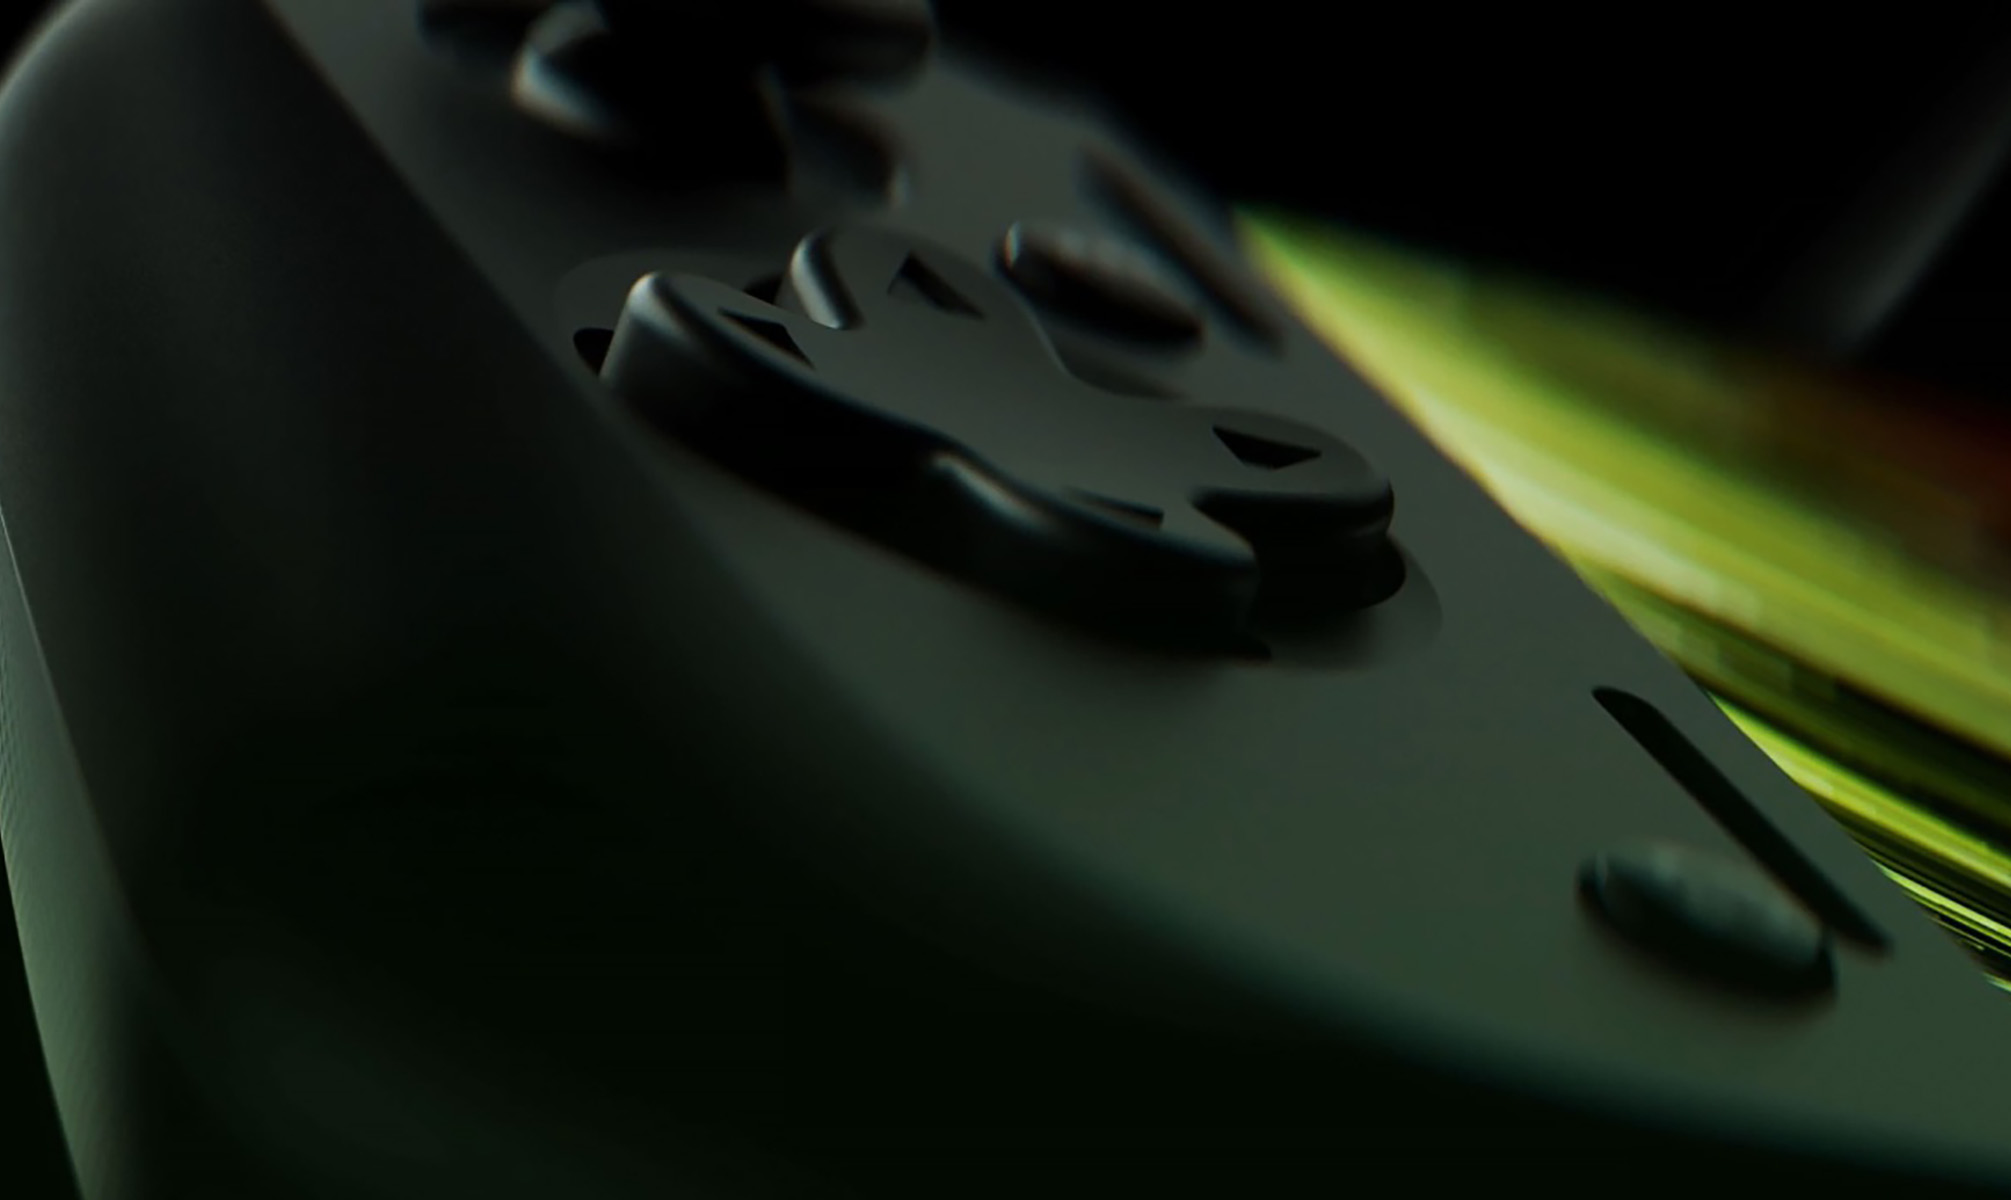 Razer Teases Handheld Android Gaming Unit With 5G